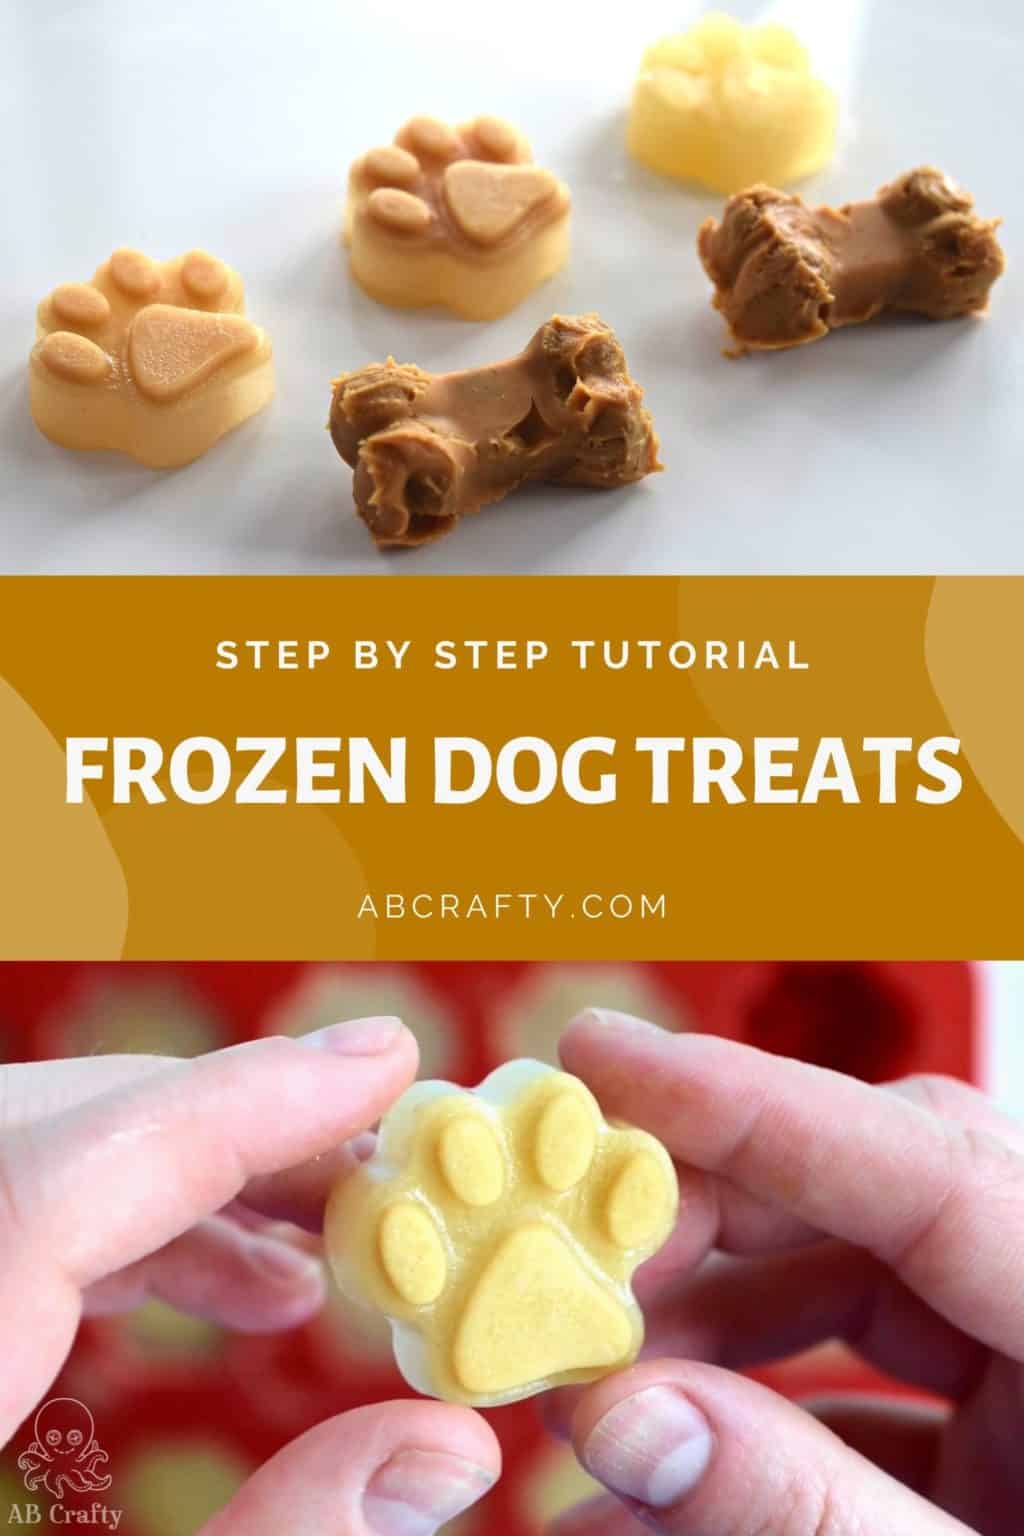 top image shows multiple frozen dog treats made of broth and peanut butter in the shapes of bones and paws. The bottom image is hands holding a frozen broth treat in the shape of a dog paw. the title reads "step by step tutorial - frozen dog treats, abcrafty.com"